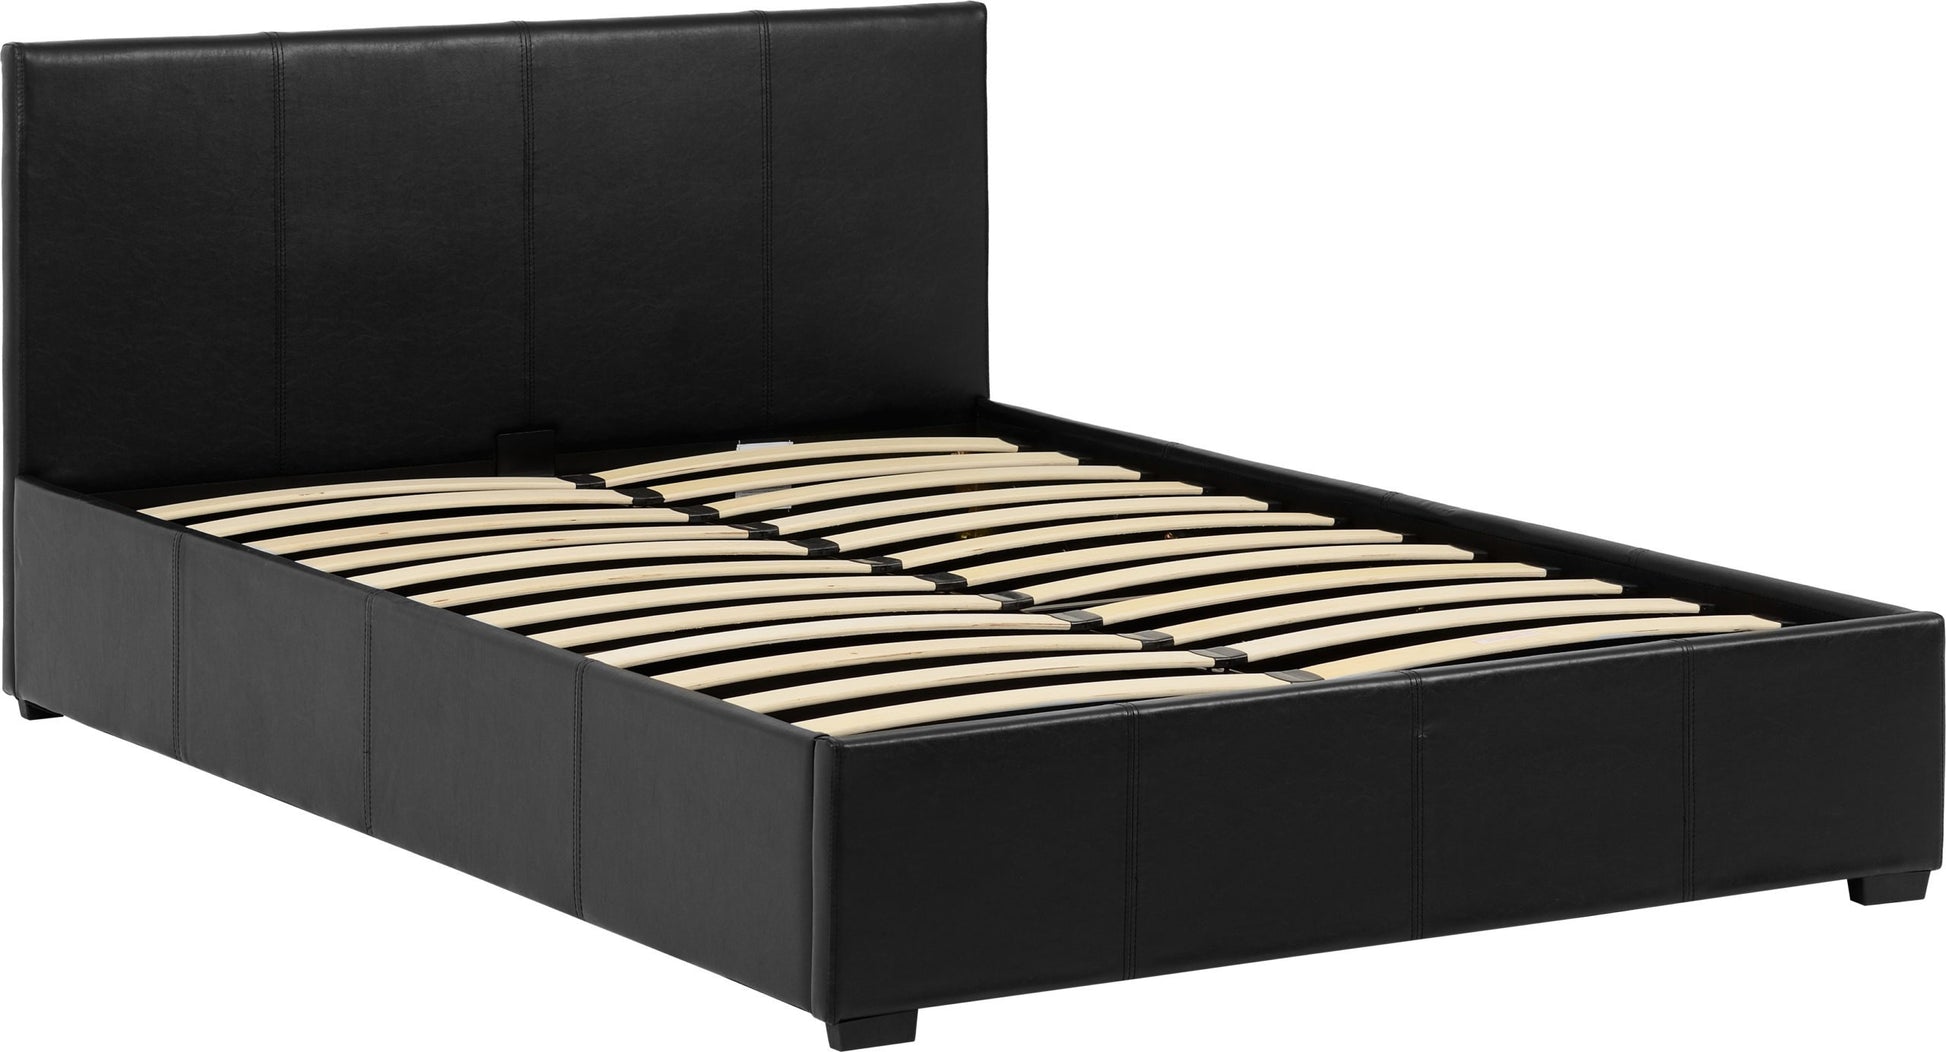 Waverley 4' Storage Small Double Bed - Black Faux Leather